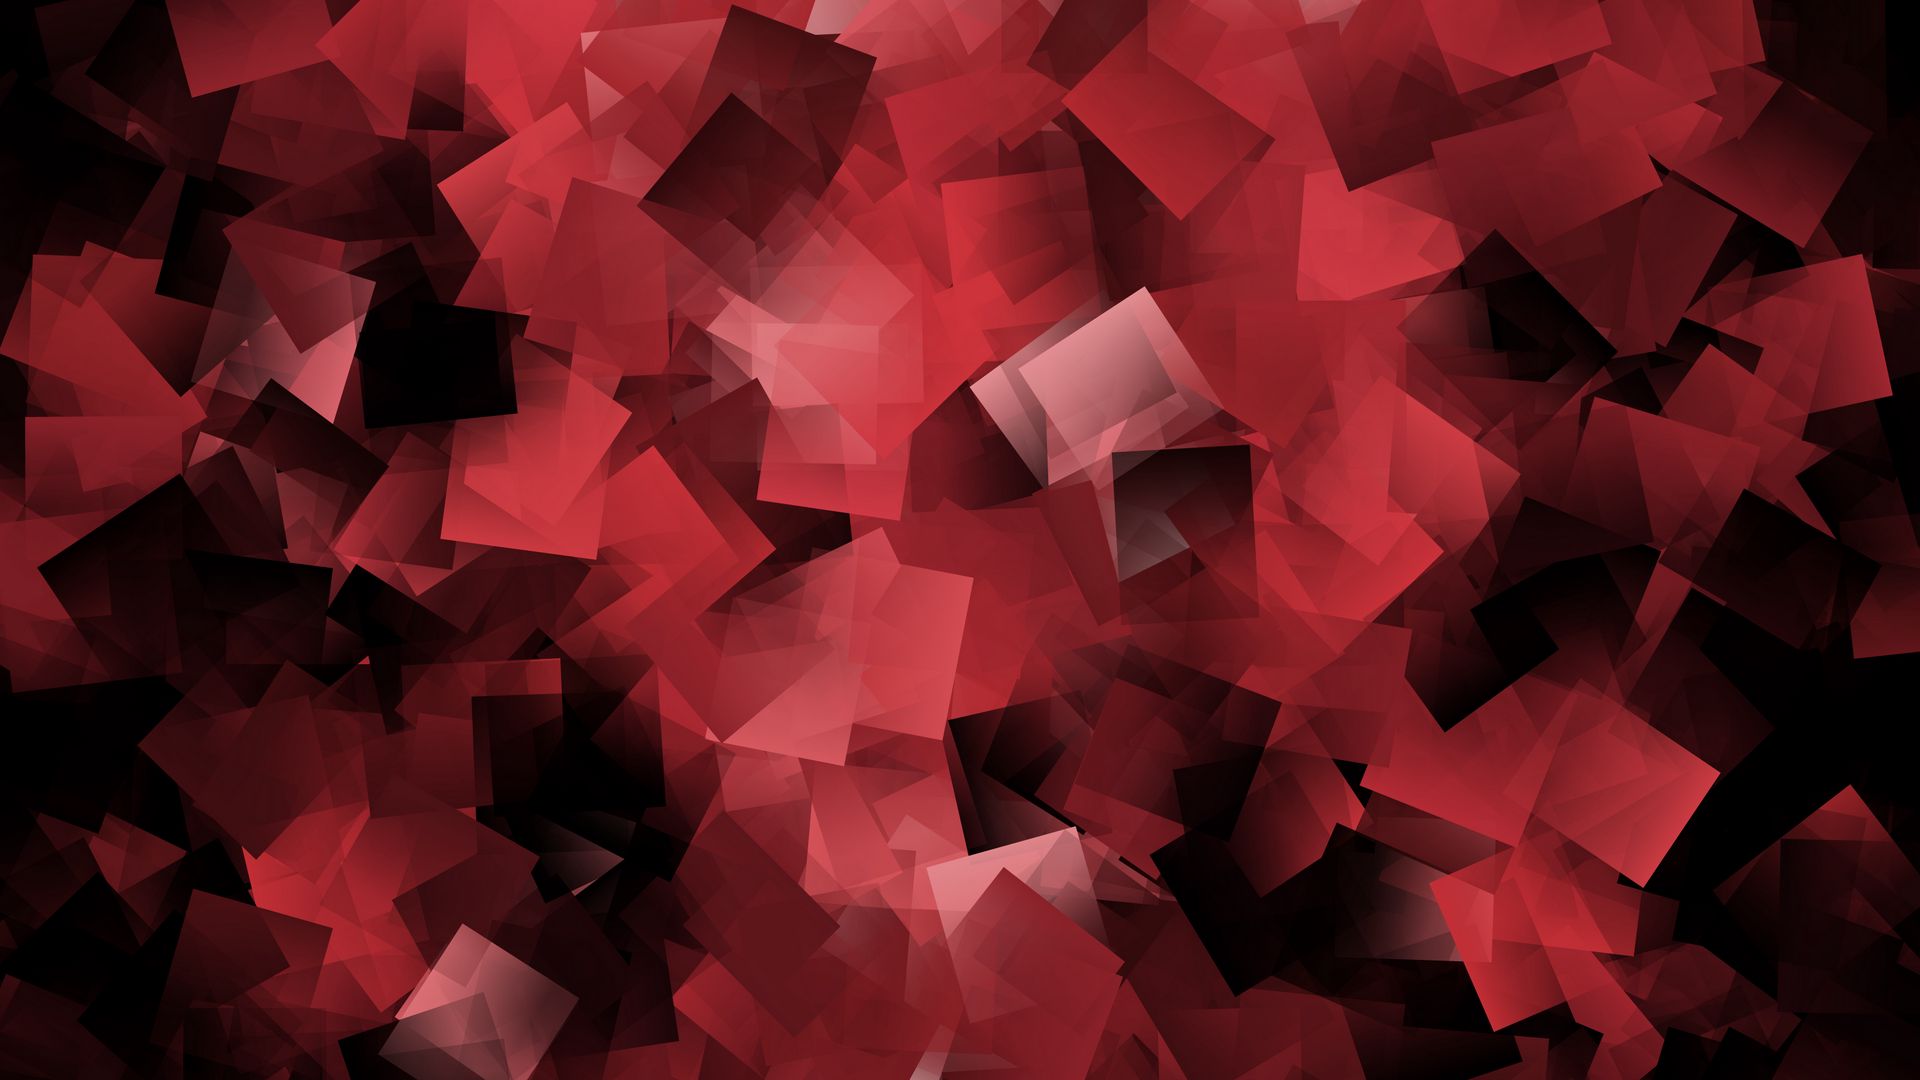 Download wallpaper 1920x1080 squares, transparent, intersection, red ...